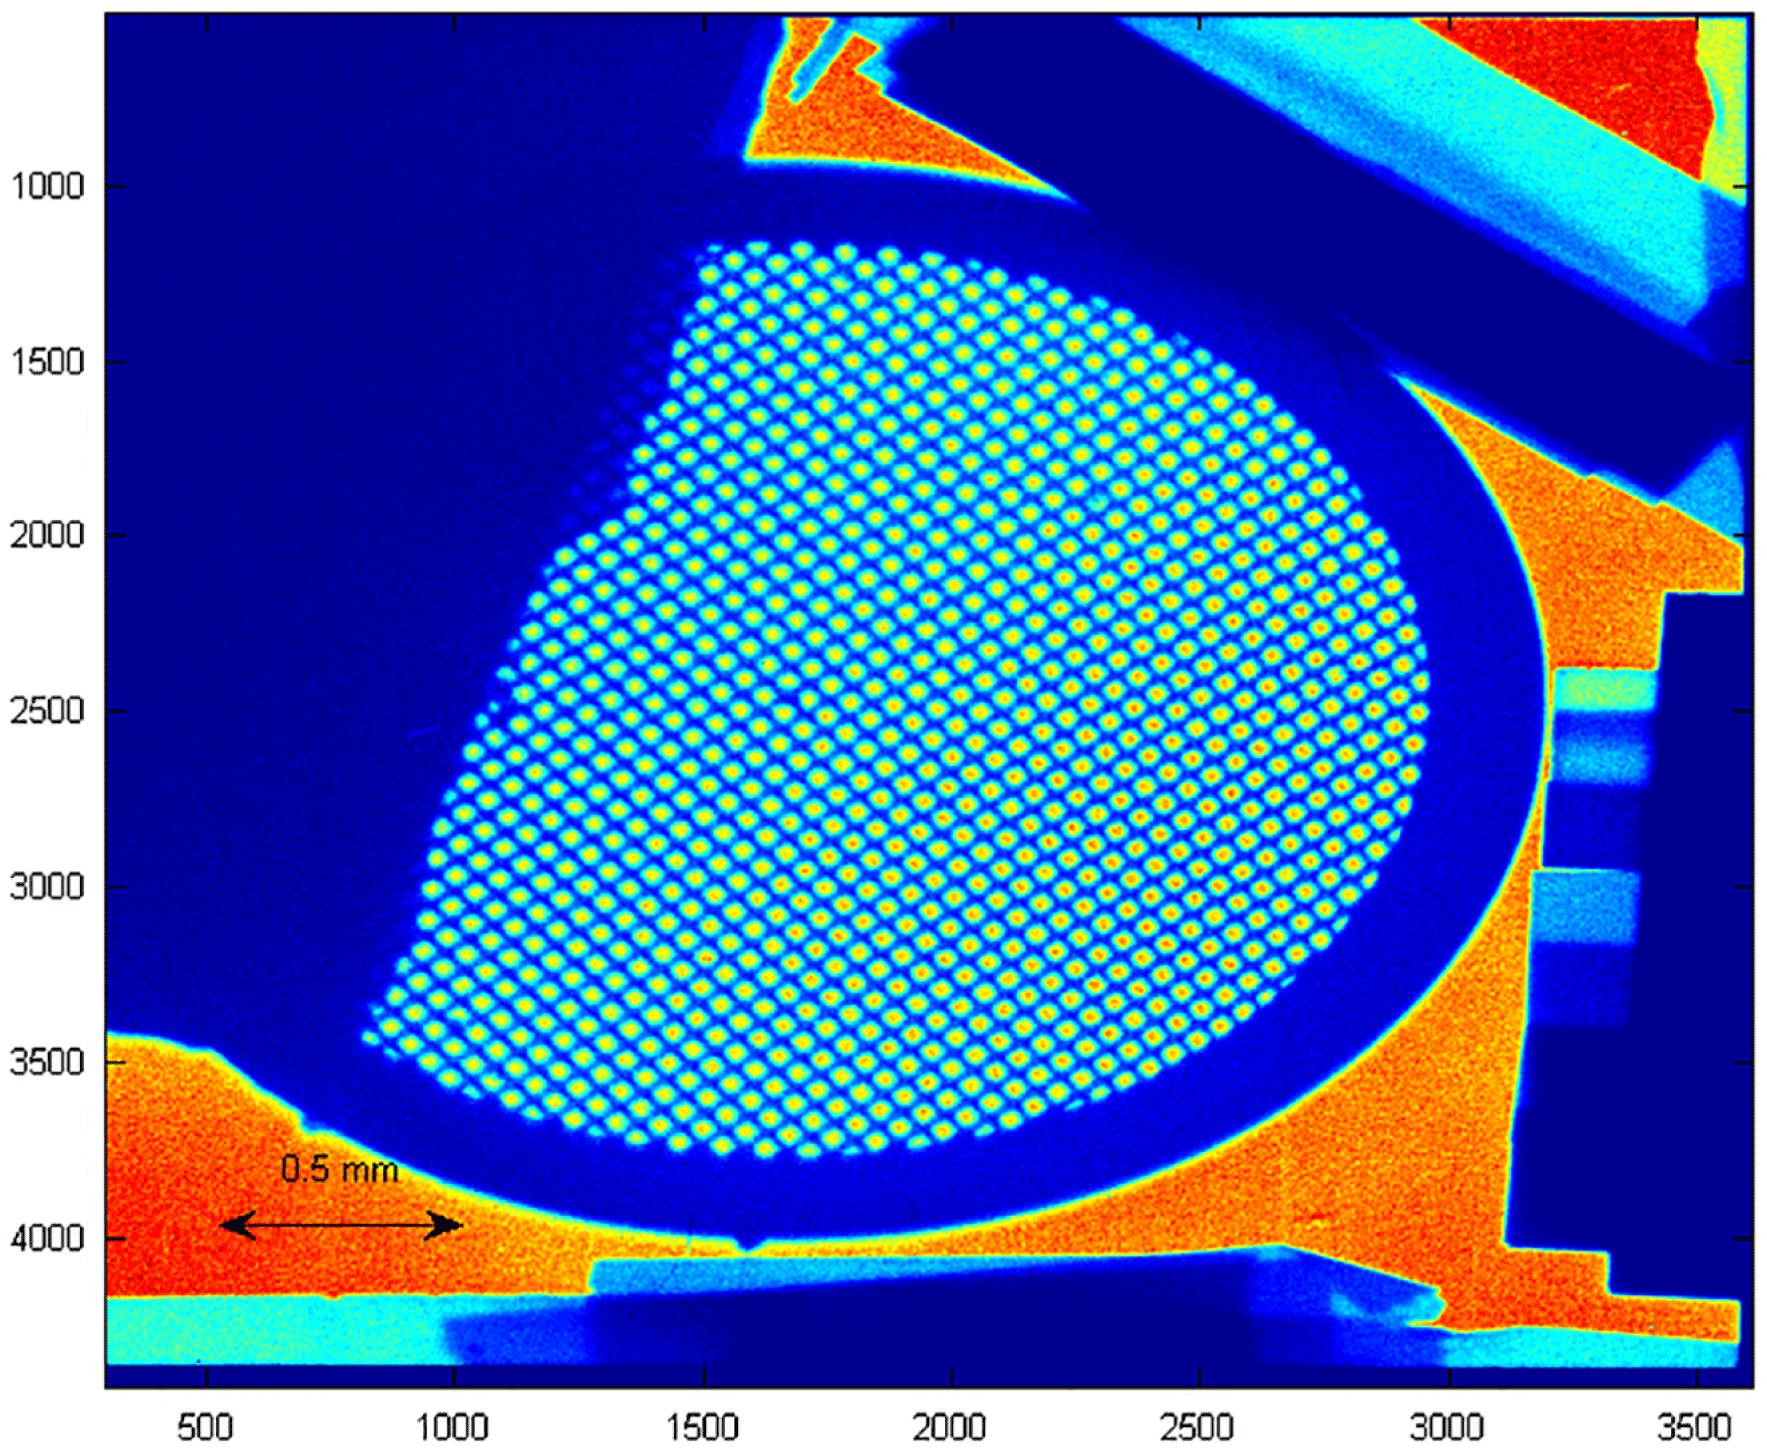 Raw data of the radiography. The projected object is a 400 lpi gold grid. In addition, there are step targets of plastic and aluminum to estimate the dynamic resolution.